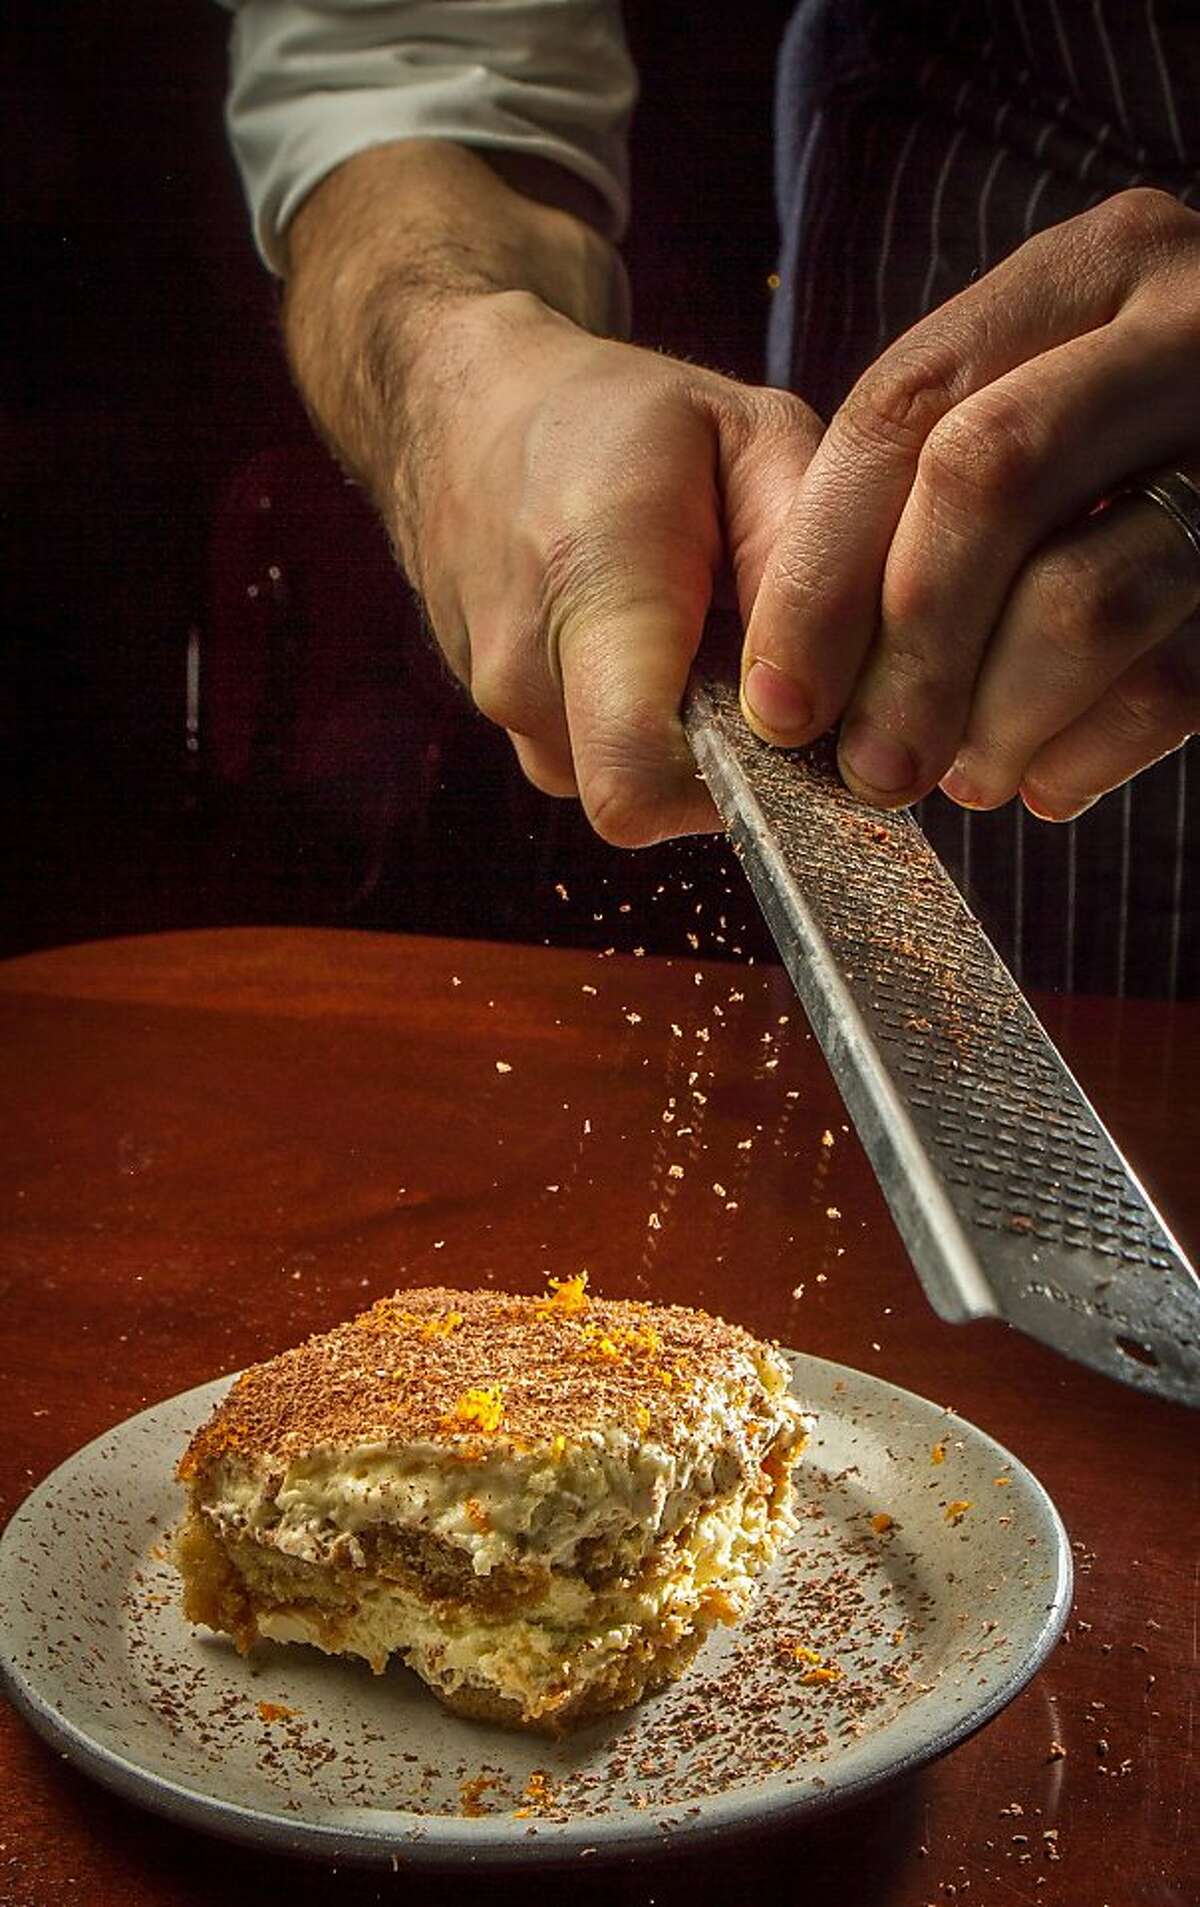 Chocolate being grated over Tiramisu at Tosca in San Francisco, Calif., is seen on November, 21st, 2013.